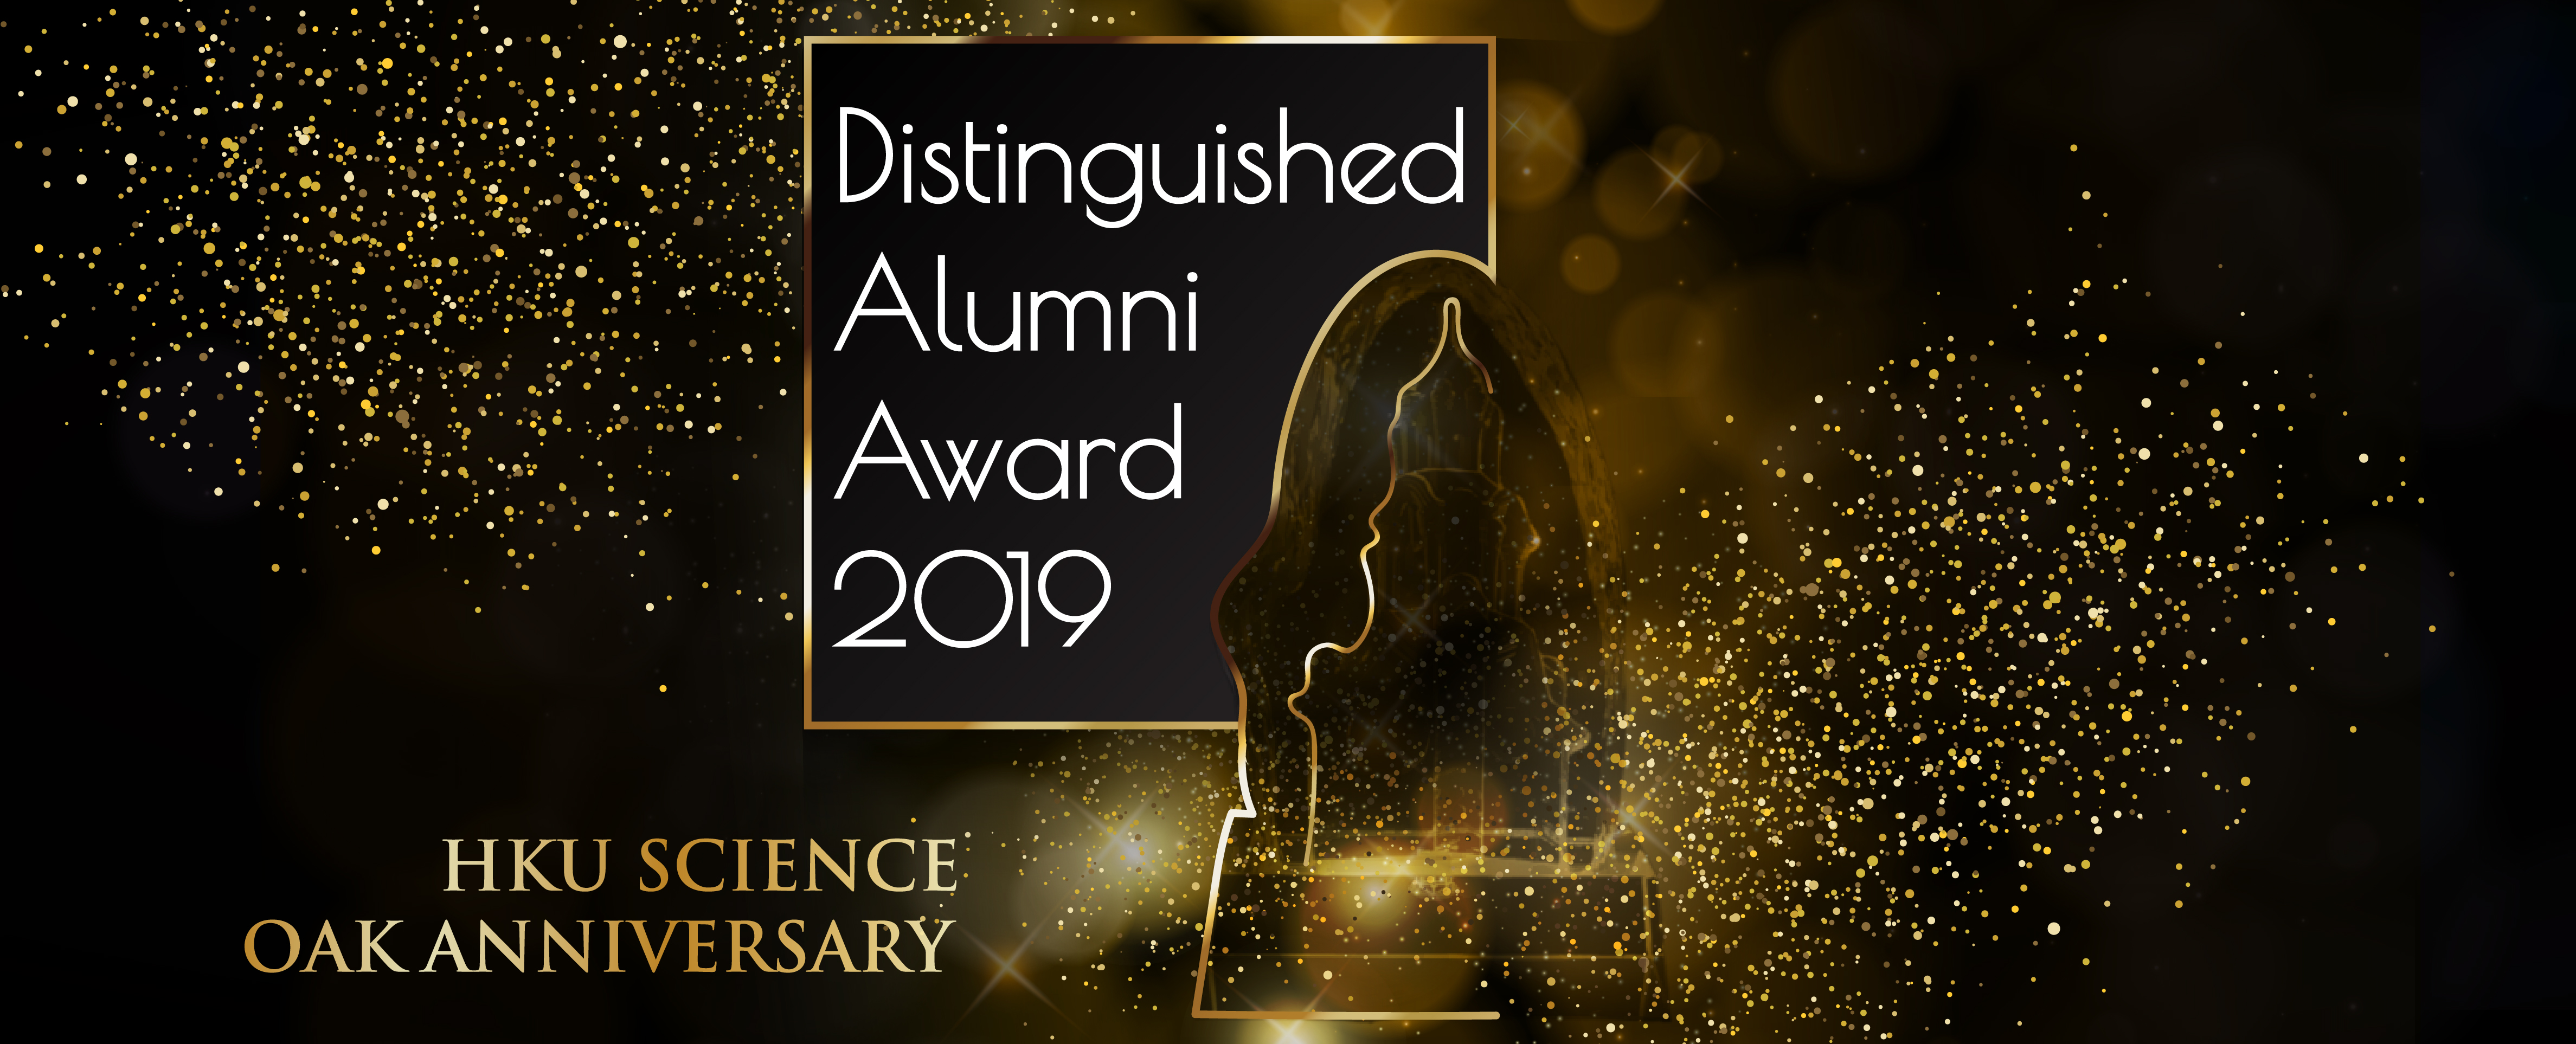 Faculty of Science Distinguished Alumni Award 2019